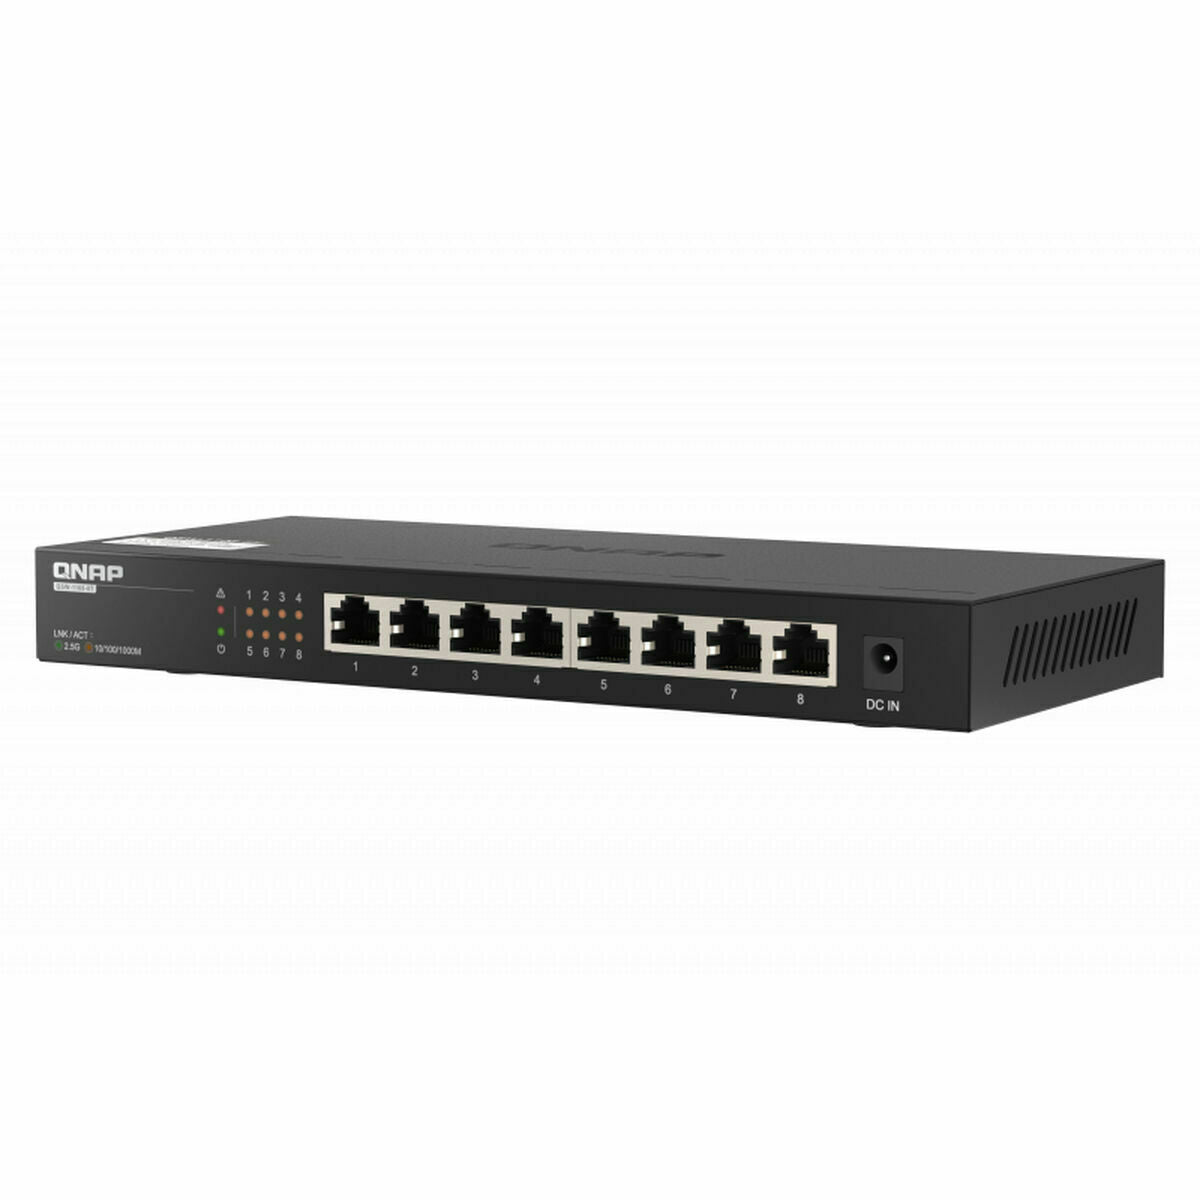 Switch Qnap QSW-1108-8T, Qnap, Computing, Network devices, switch-qnap-qsw-1108-8t-2, Brand_Qnap, category-reference-2609, category-reference-2803, category-reference-2827, category-reference-t-19685, category-reference-t-19914, category-reference-t-21367, Condition_NEW, networks/wiring, Price_100 - 200, Teleworking, RiotNook